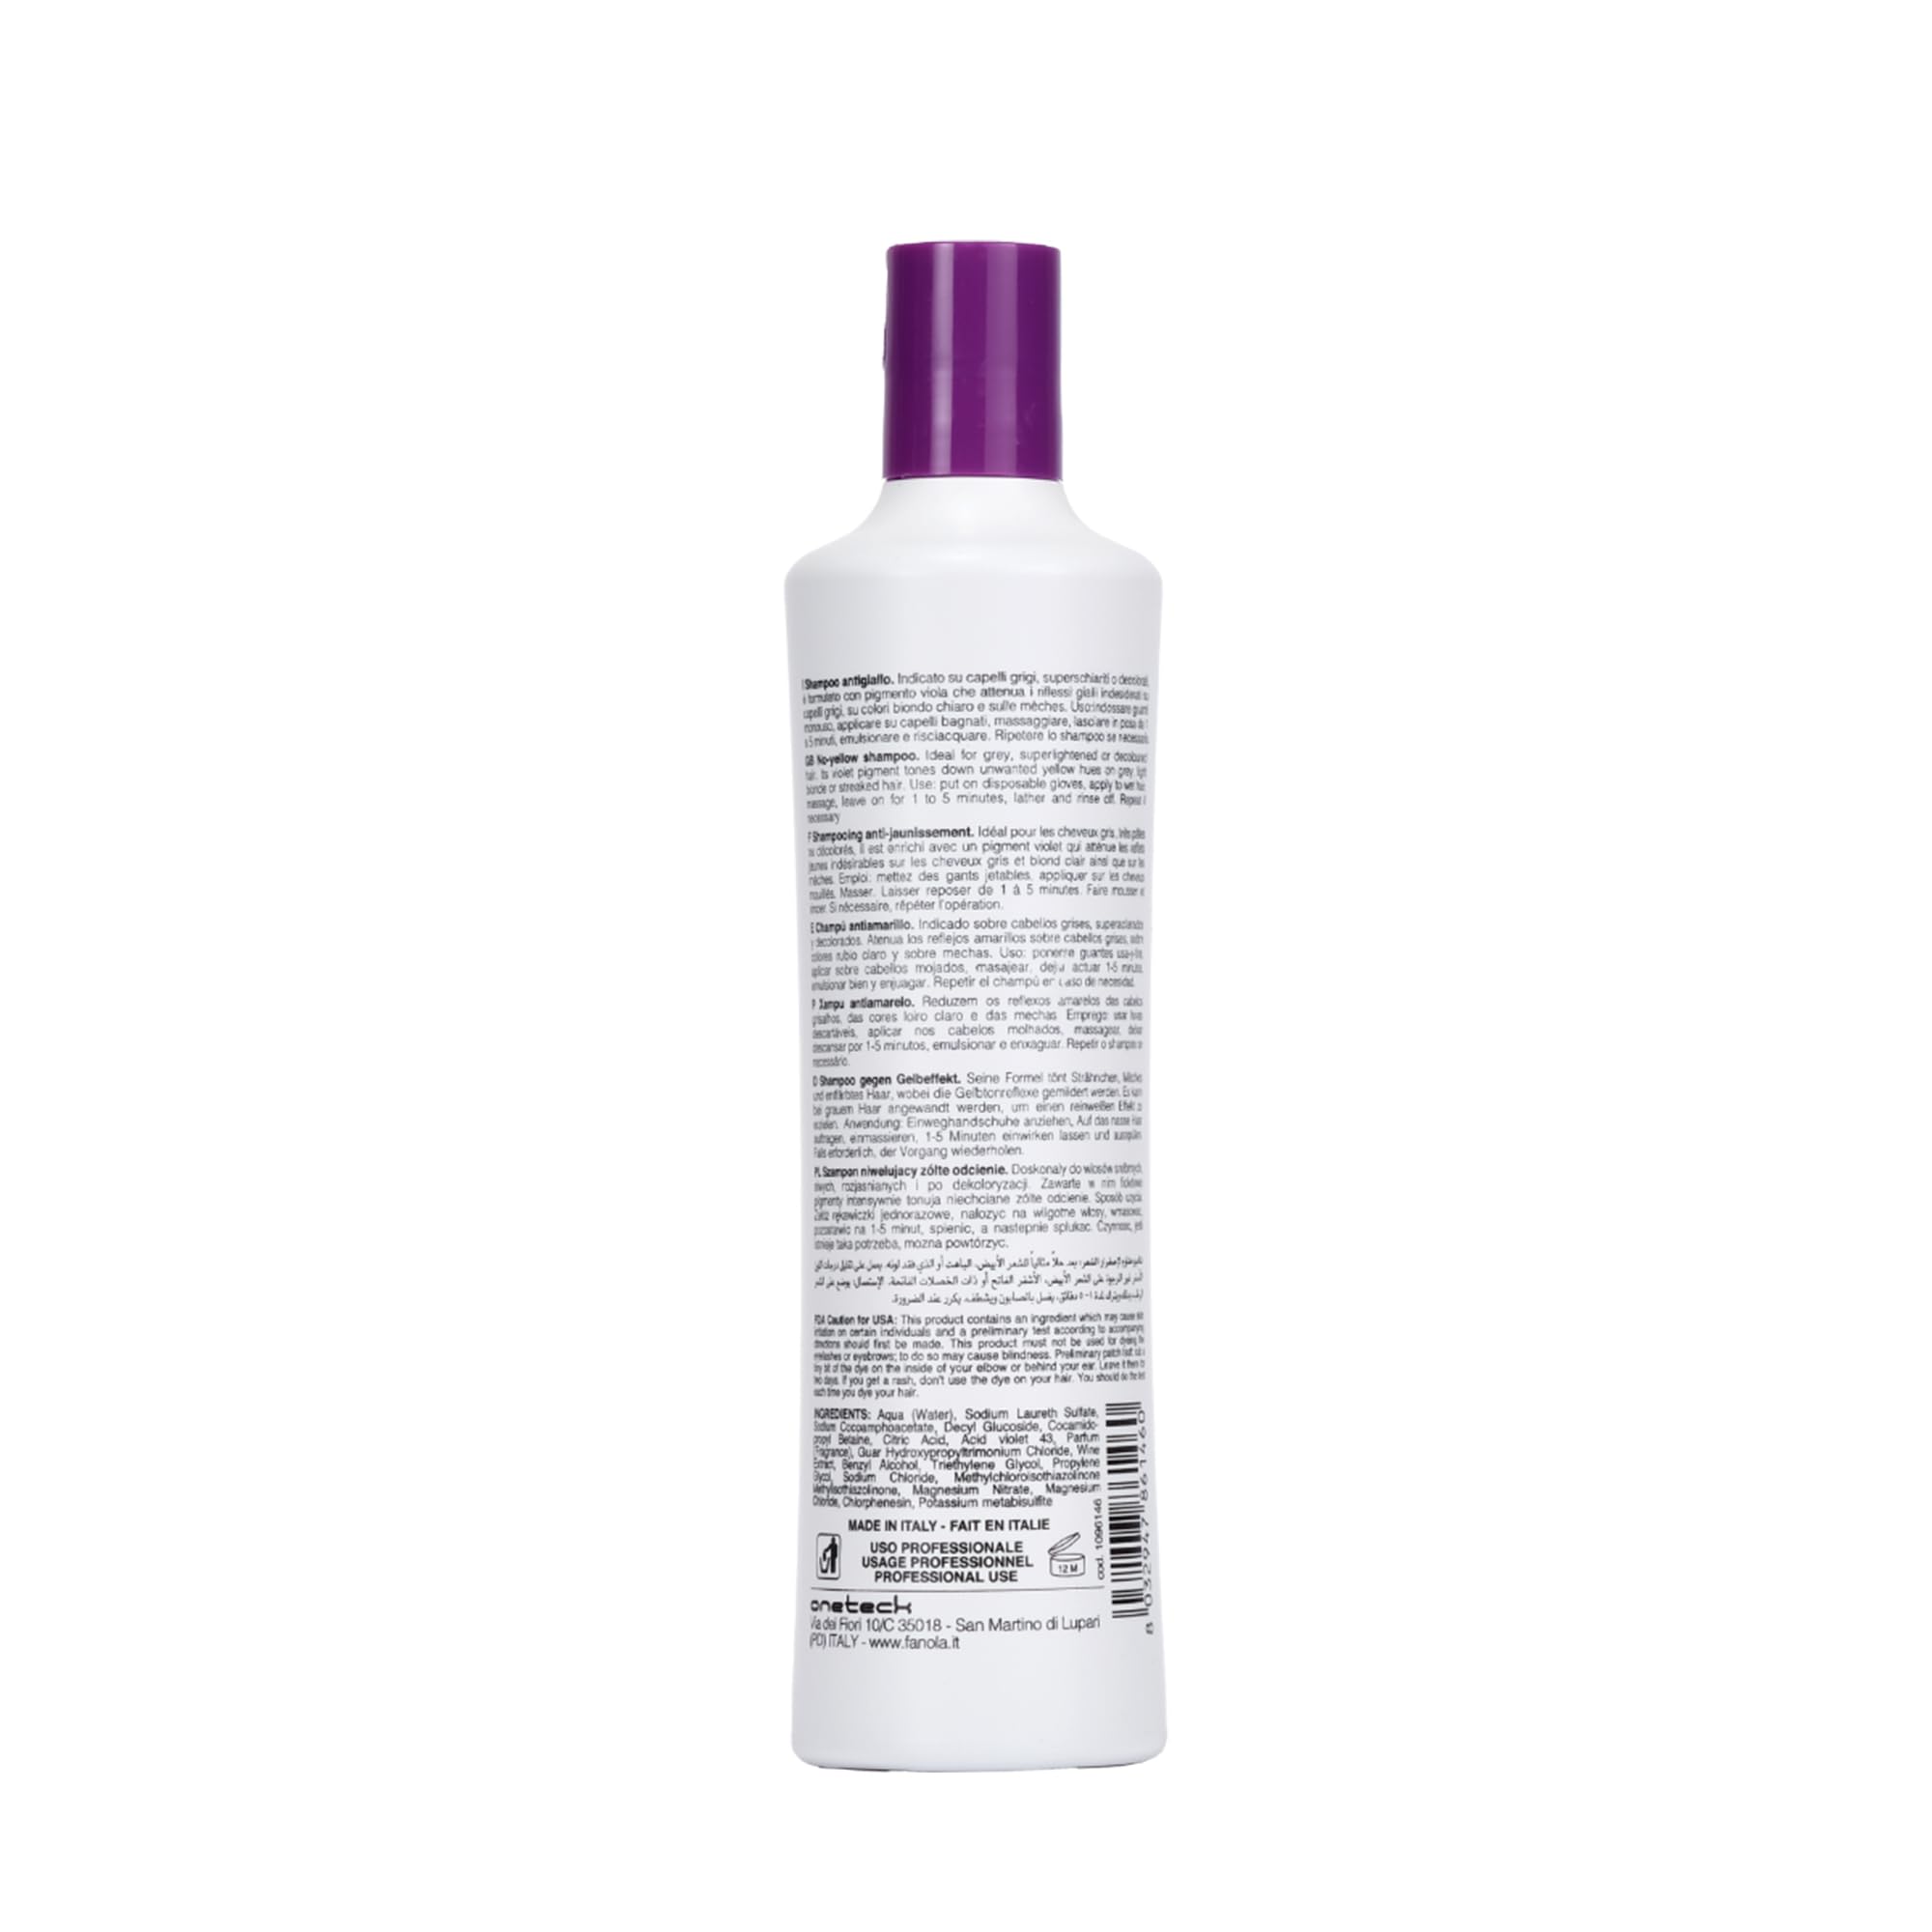 Fanola No Yellow Shampoo 11.8 oz - Color Depositing Purple Shampoo for Blonde, Silver, Gray, and Highlighted Hair - Anti Brass Shampoo Toner to Remove Yellow Tones & Brassiness from Bleached Hair